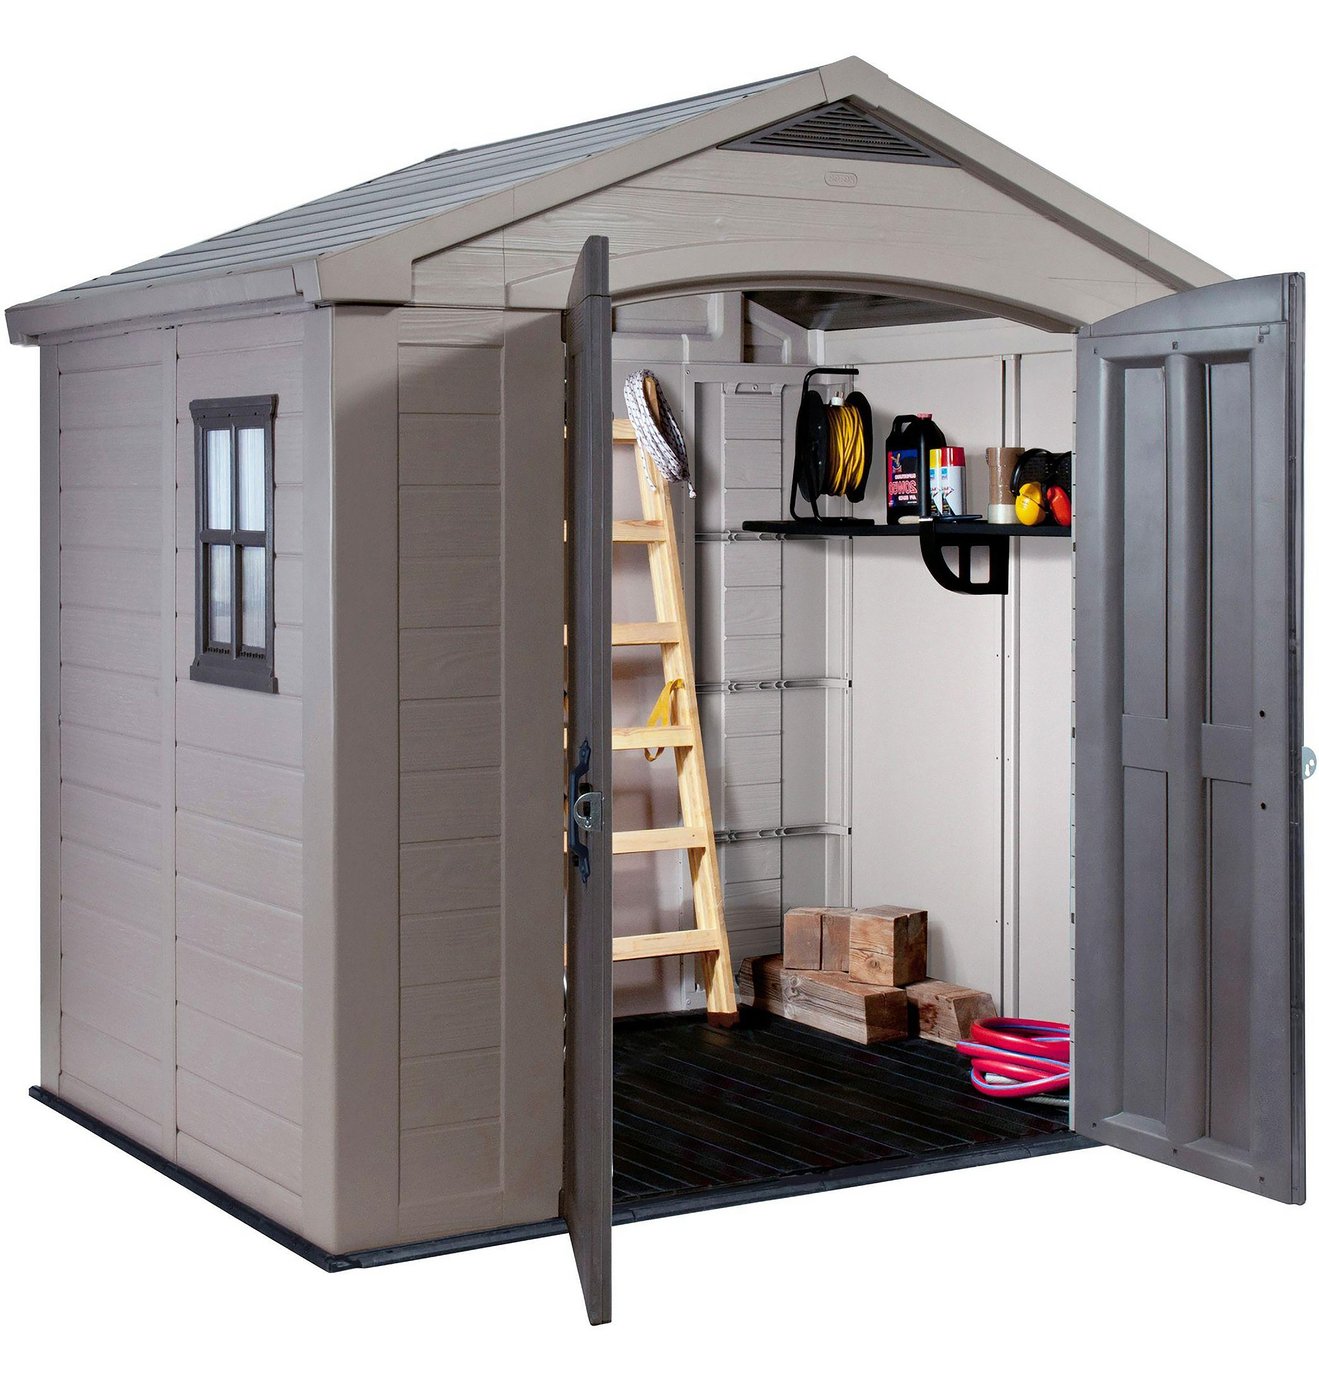 Keter Apex Plastic Garden Shed 8 x 6ft at Argos Reviews